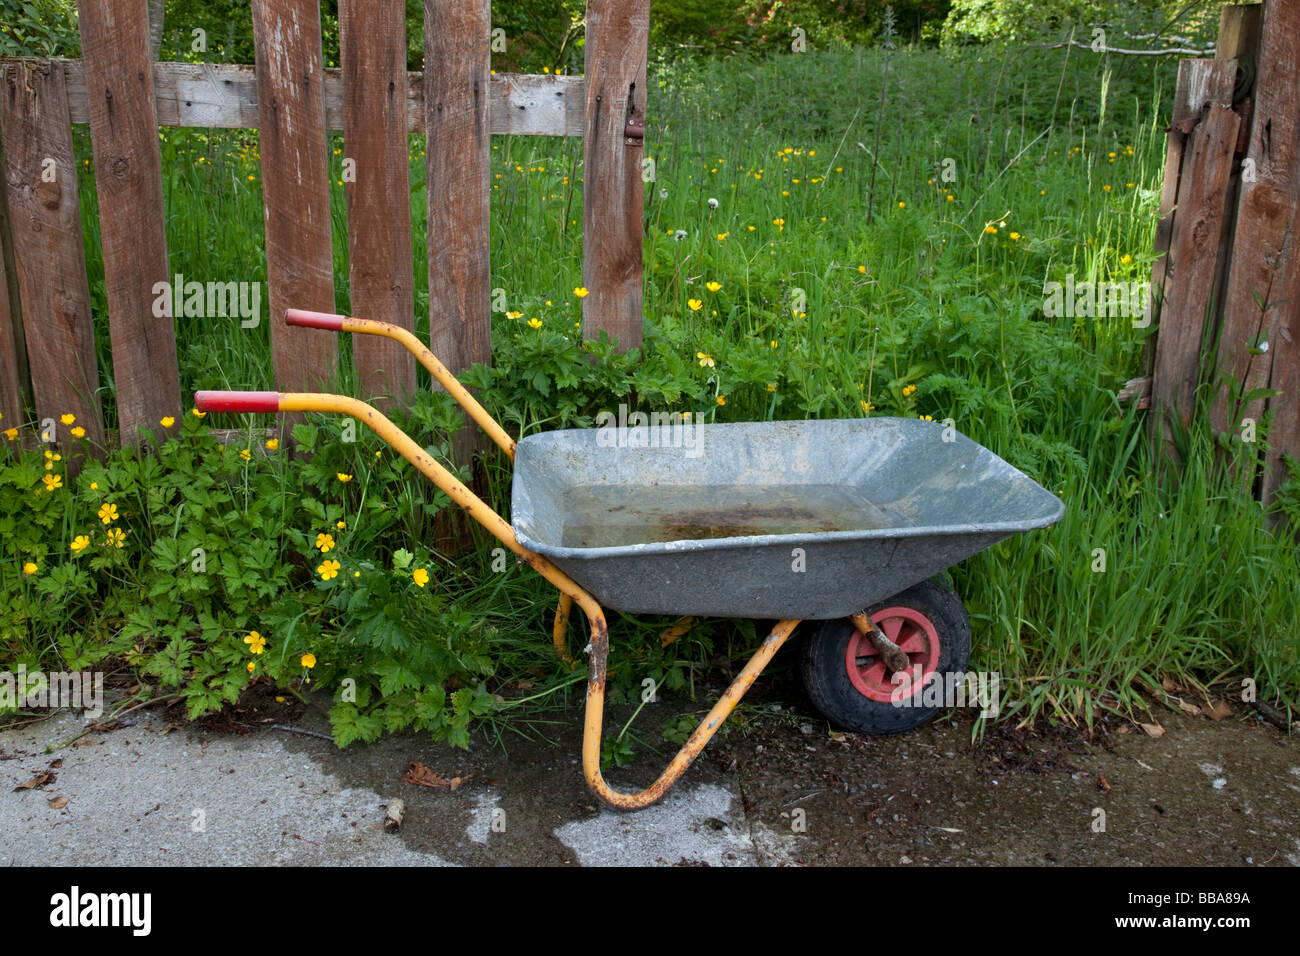 Wheel Barrow with Overgrown Grass and Weeds in Back Garden Stock Photo